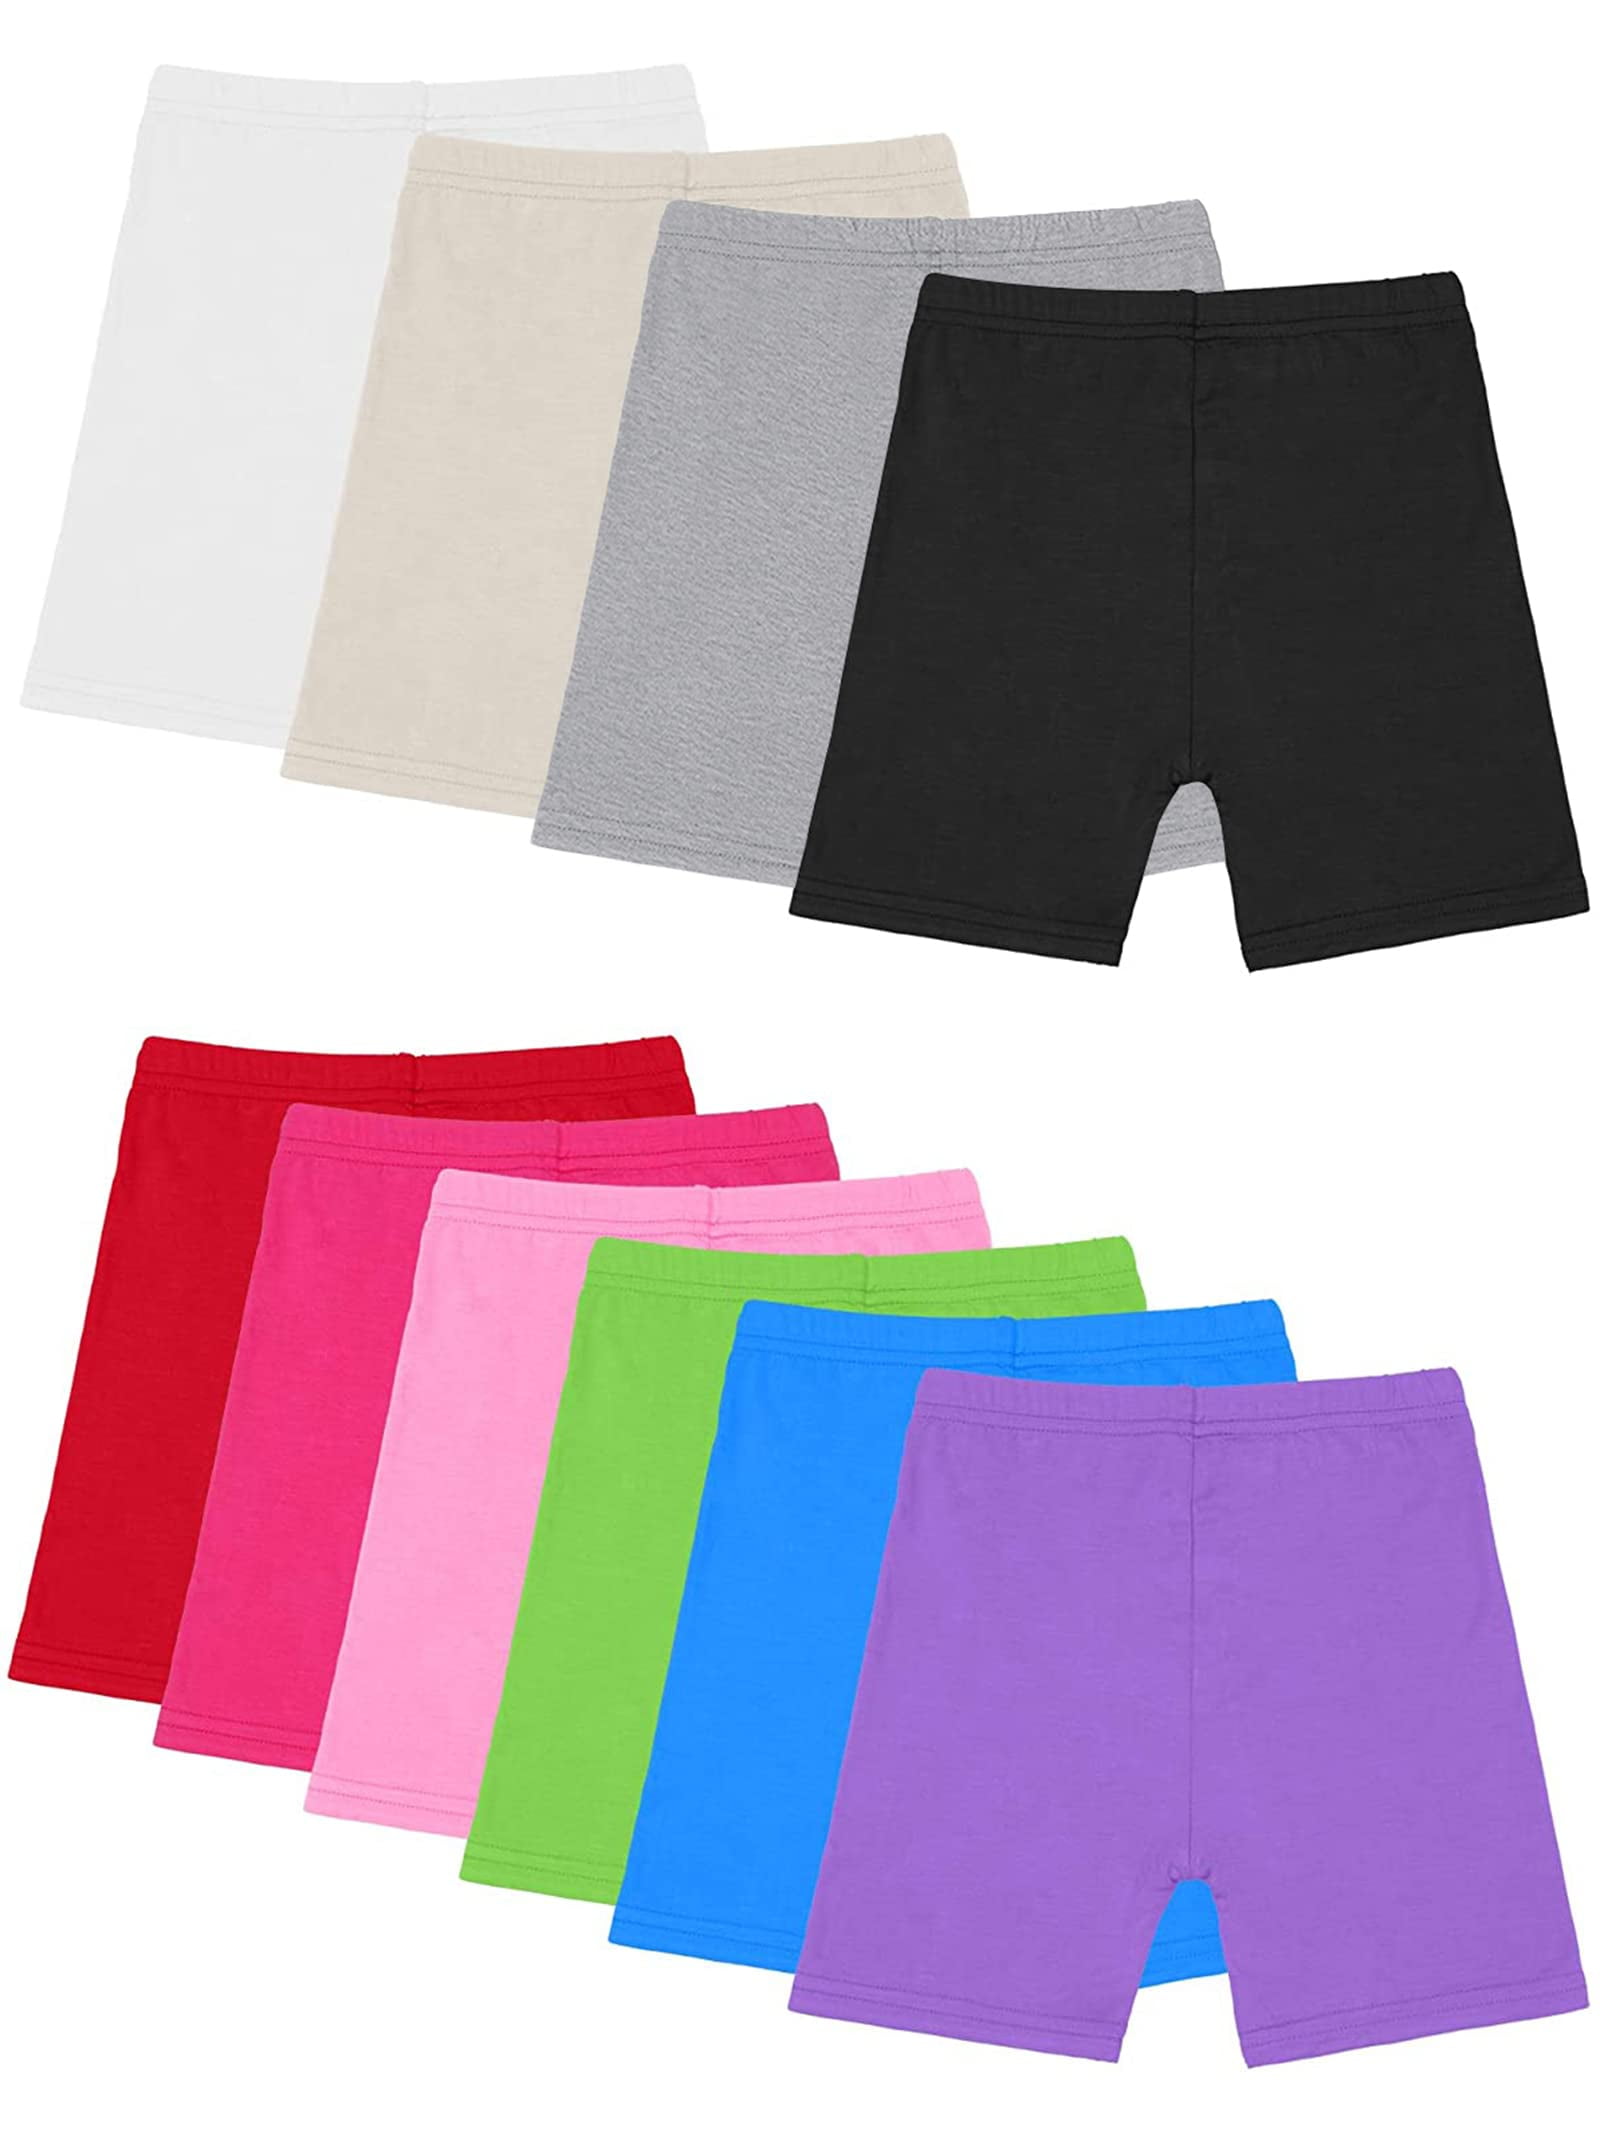 Resinta 10 Pack Dance Shorts Girls Bike Short Breathable and Safety 10 ...